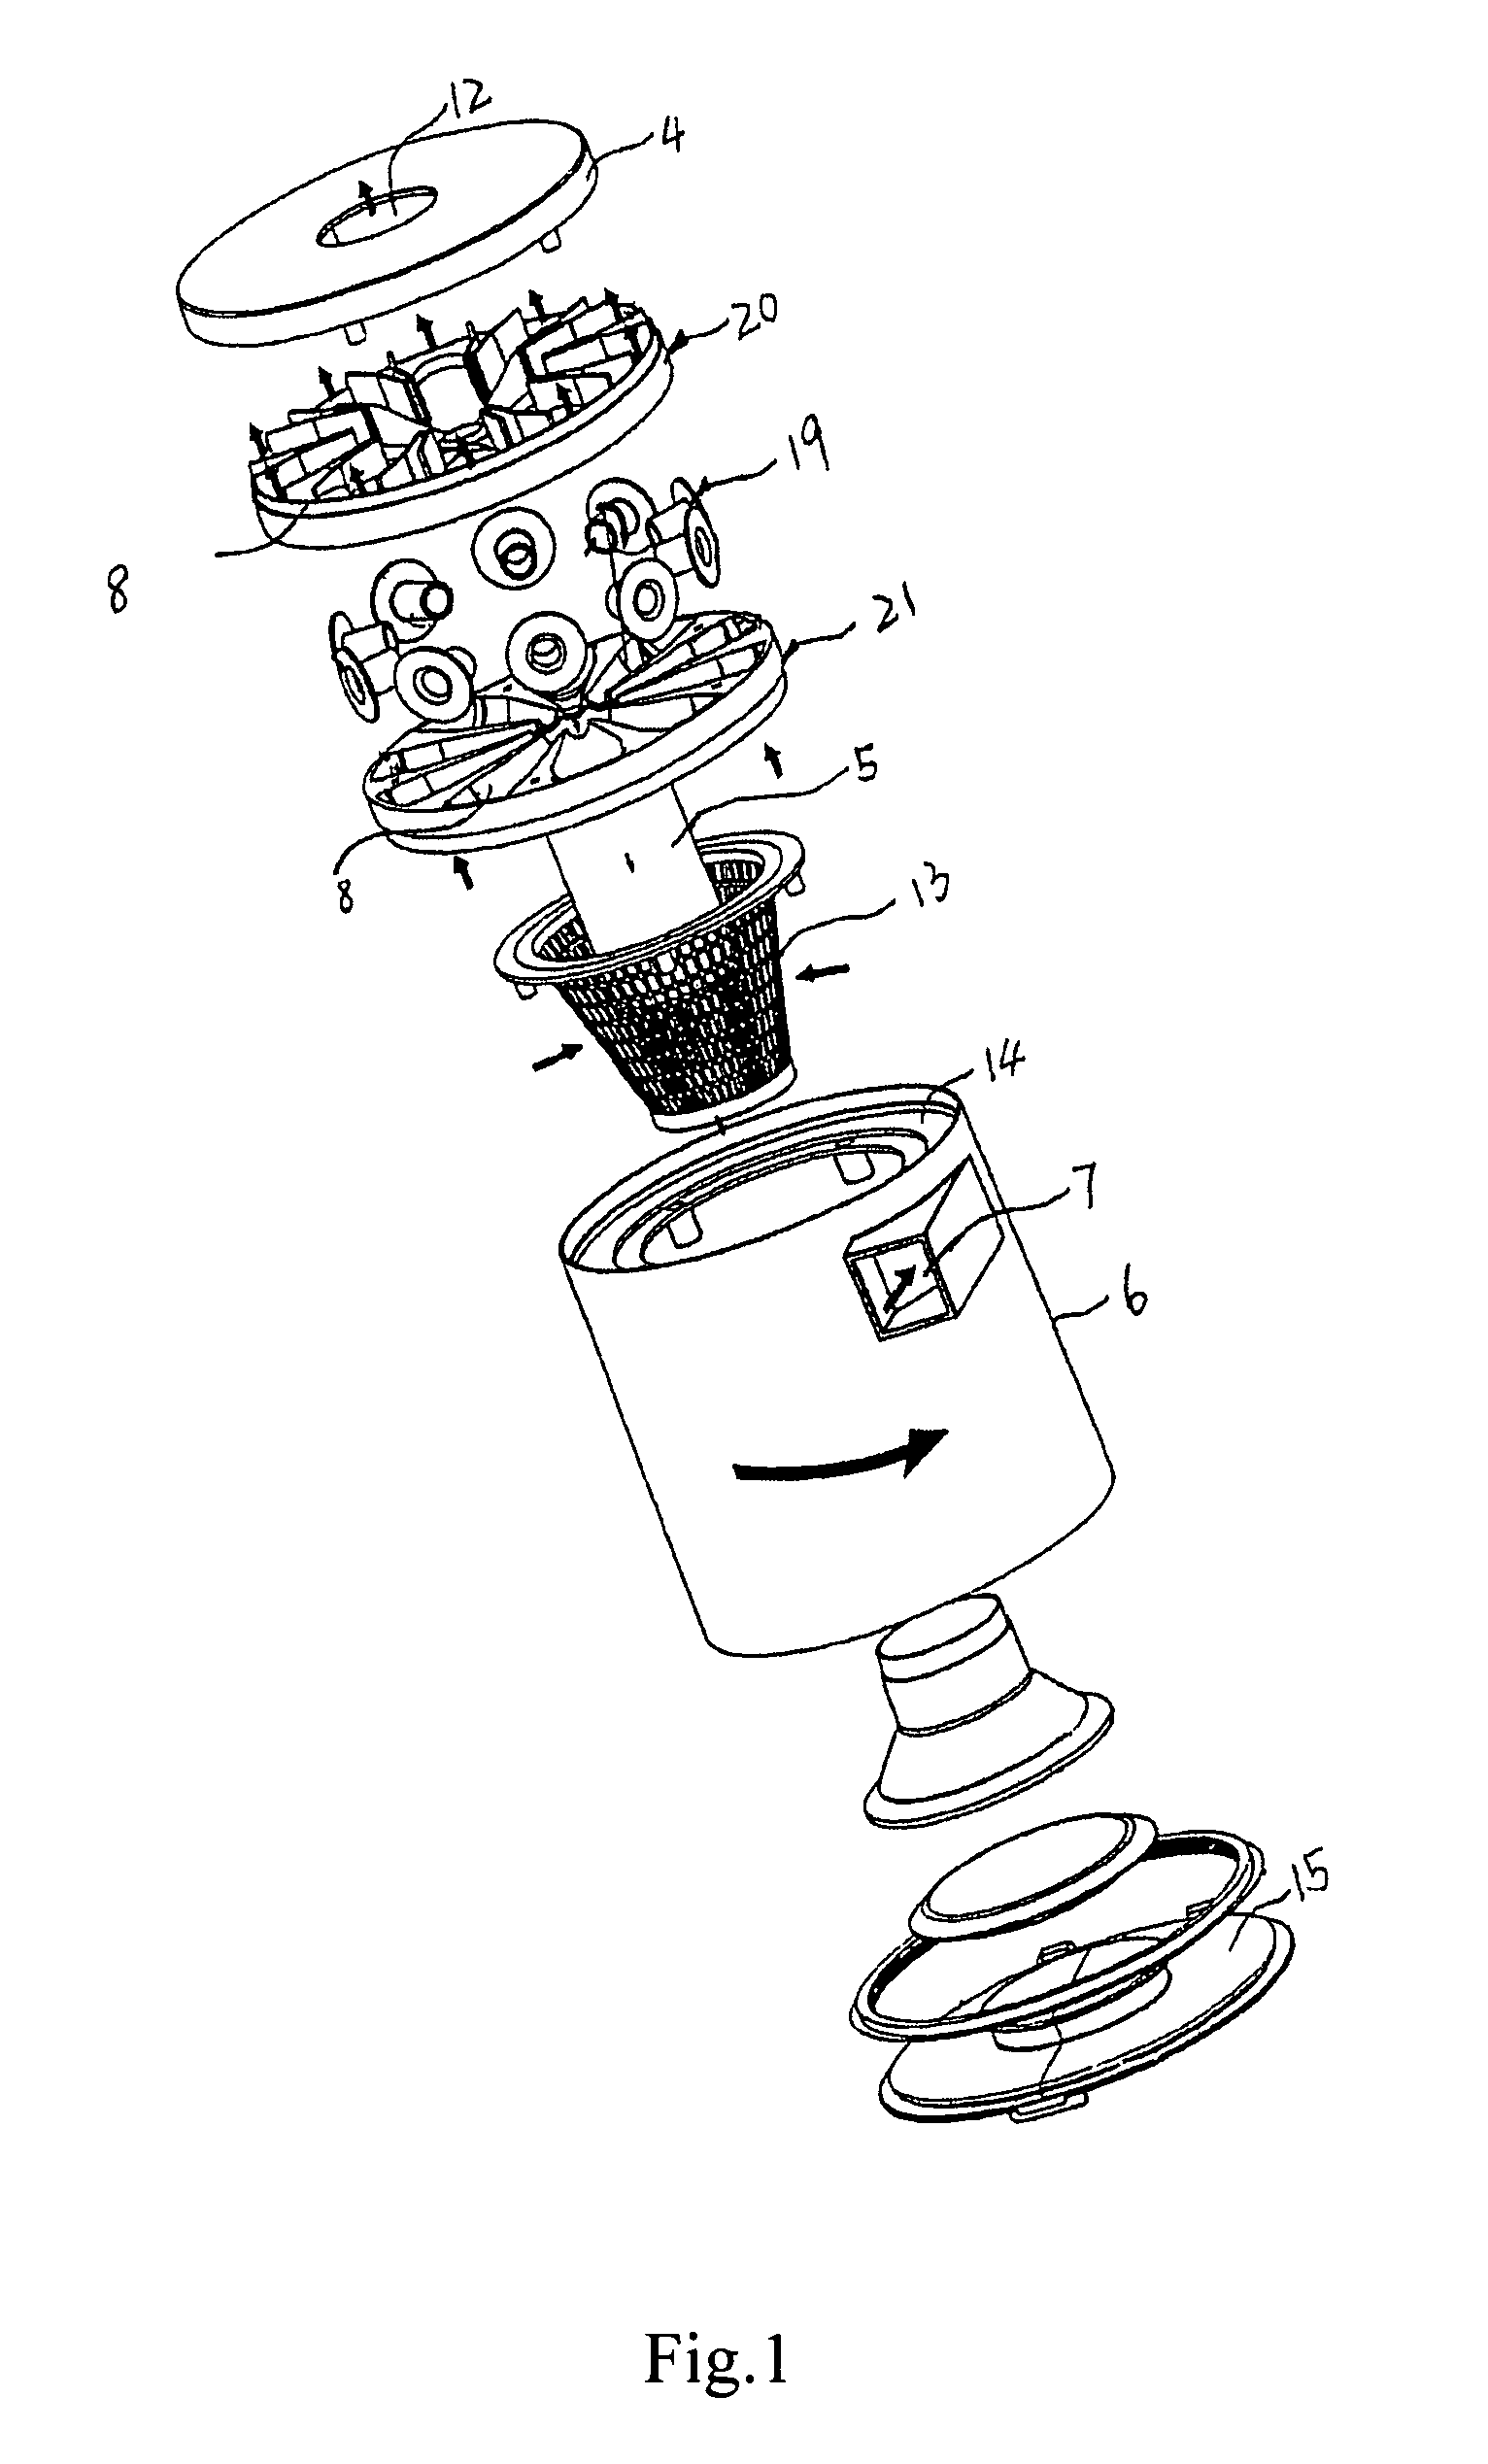 Cyclone separating device of a cleaner